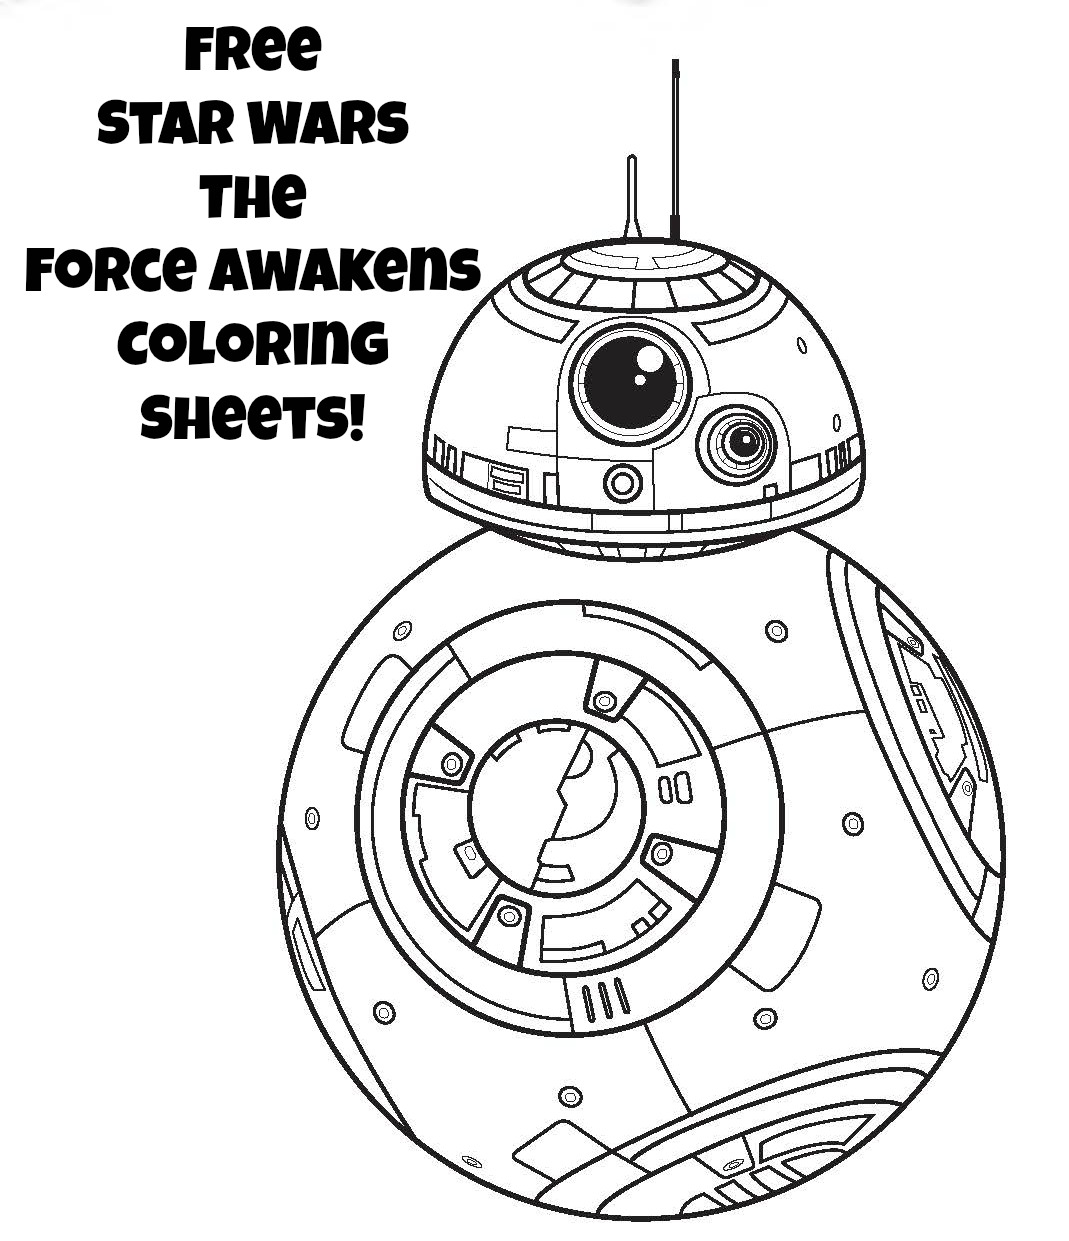 Easy Star Wars Coloring Pages at Free